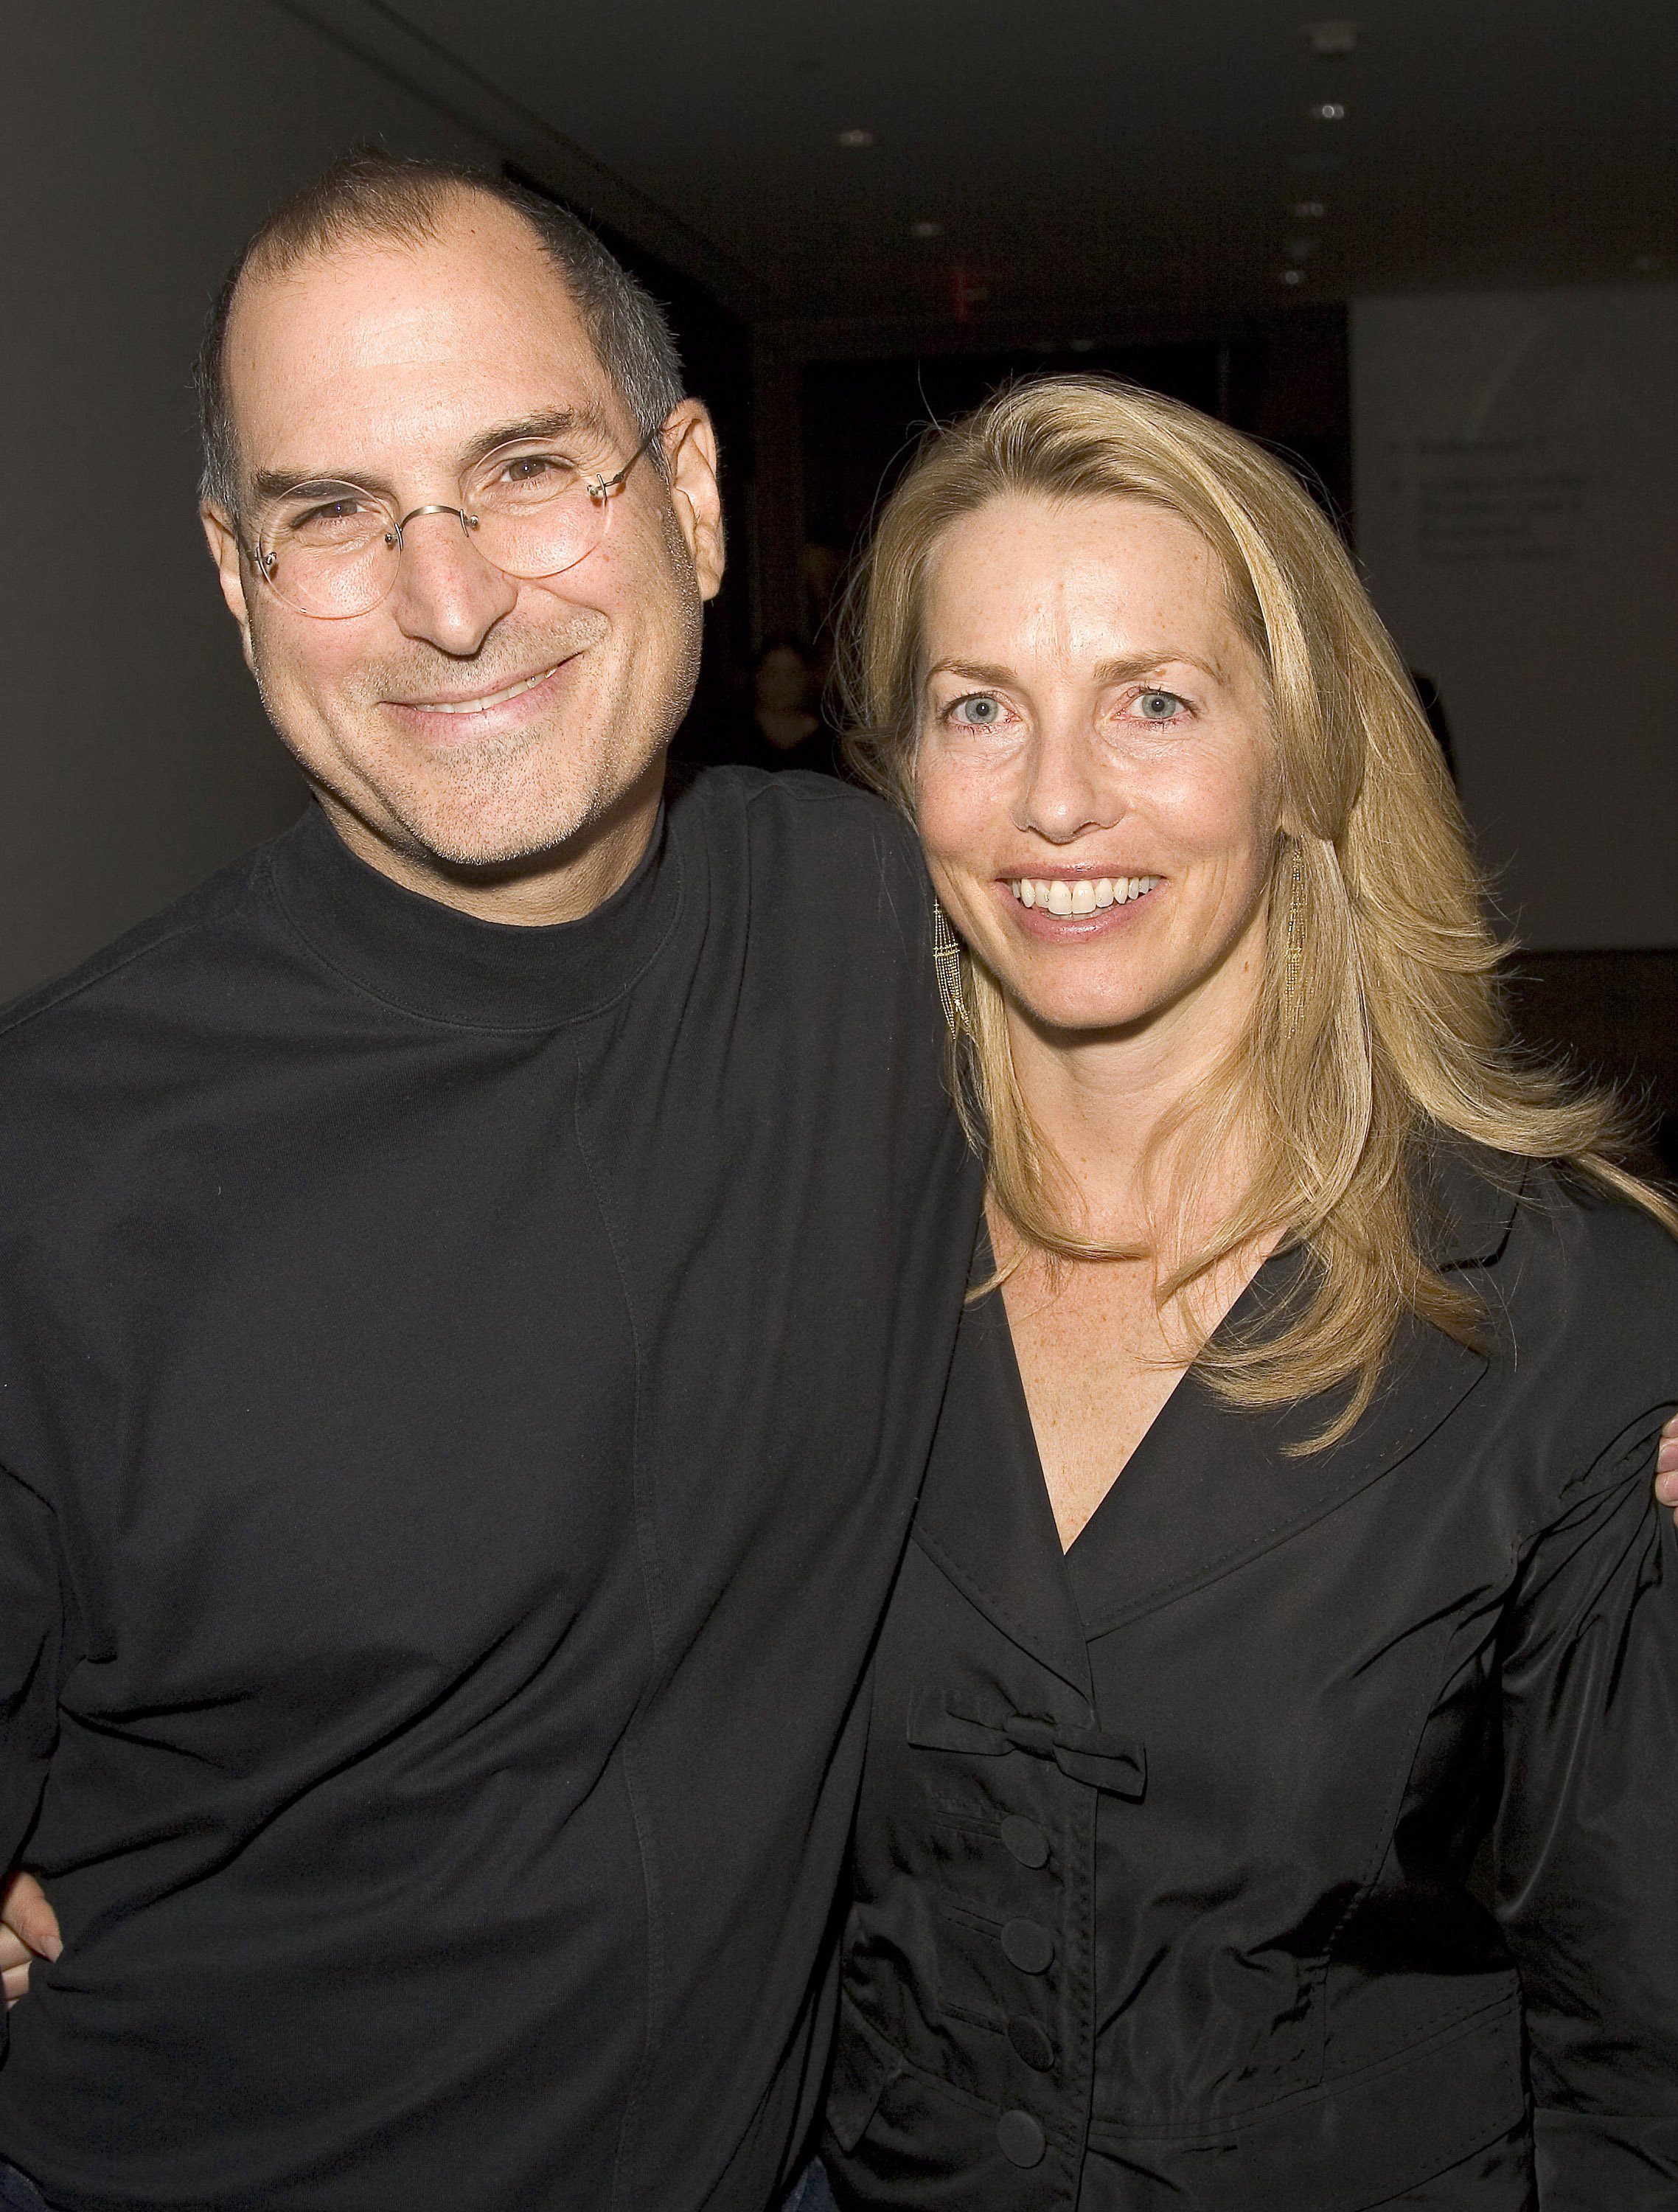 Steve Jobs and Laurene Powell during Pixar Exhibit Launch at The Museum of Modern Art on December 13, 2005 | Photo: Getty Images